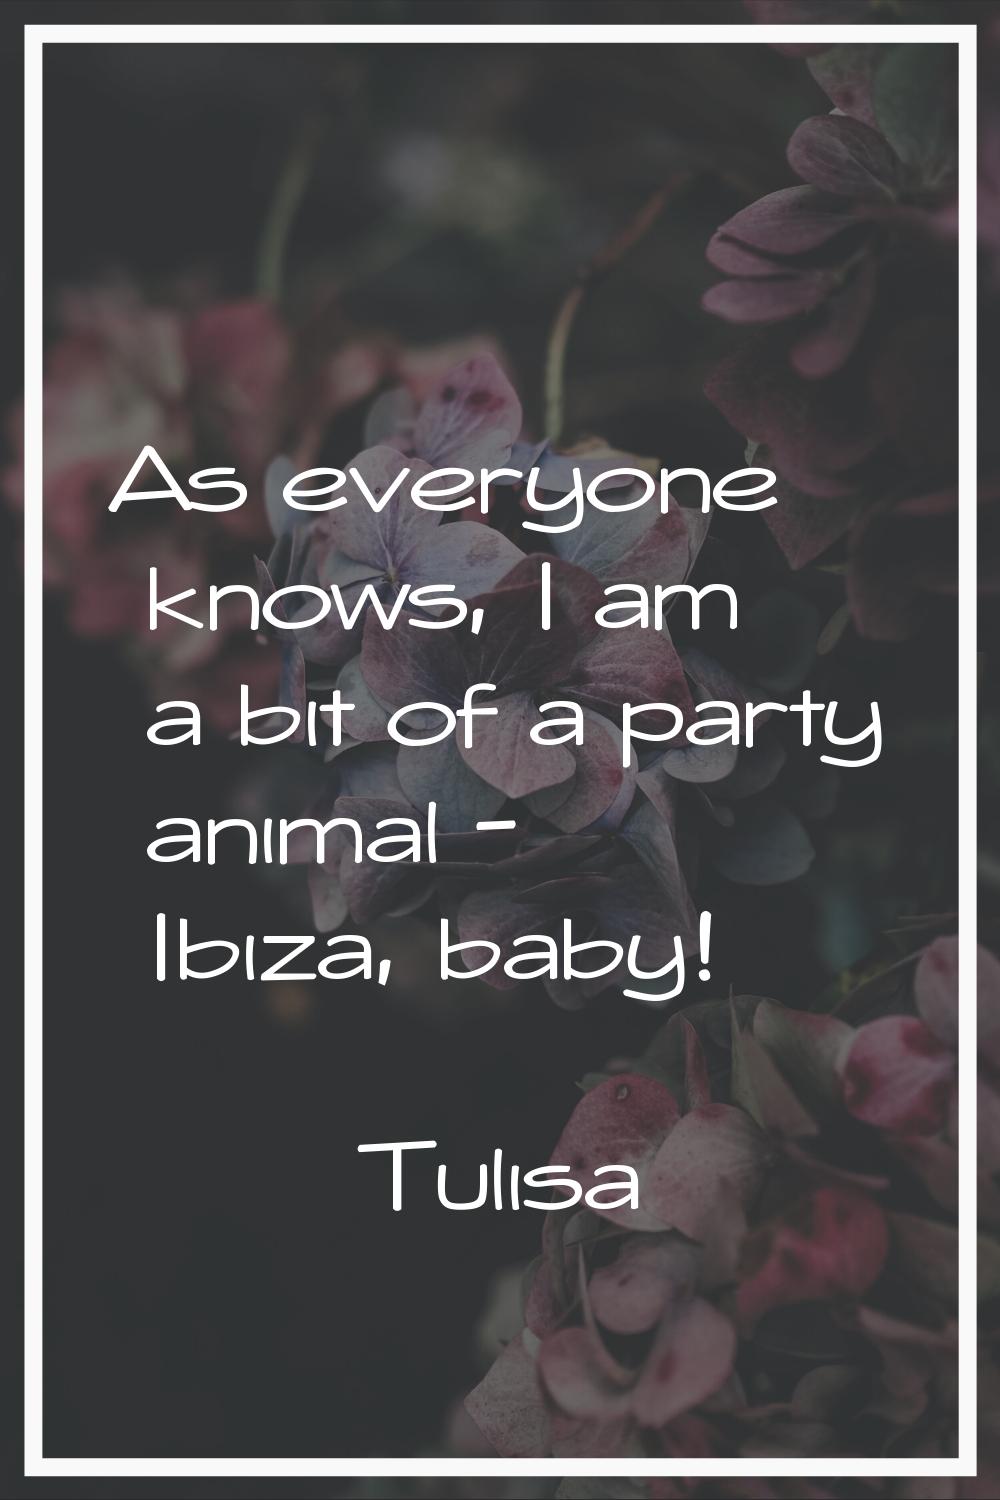 As everyone knows, I am a bit of a party animal - Ibiza, baby!